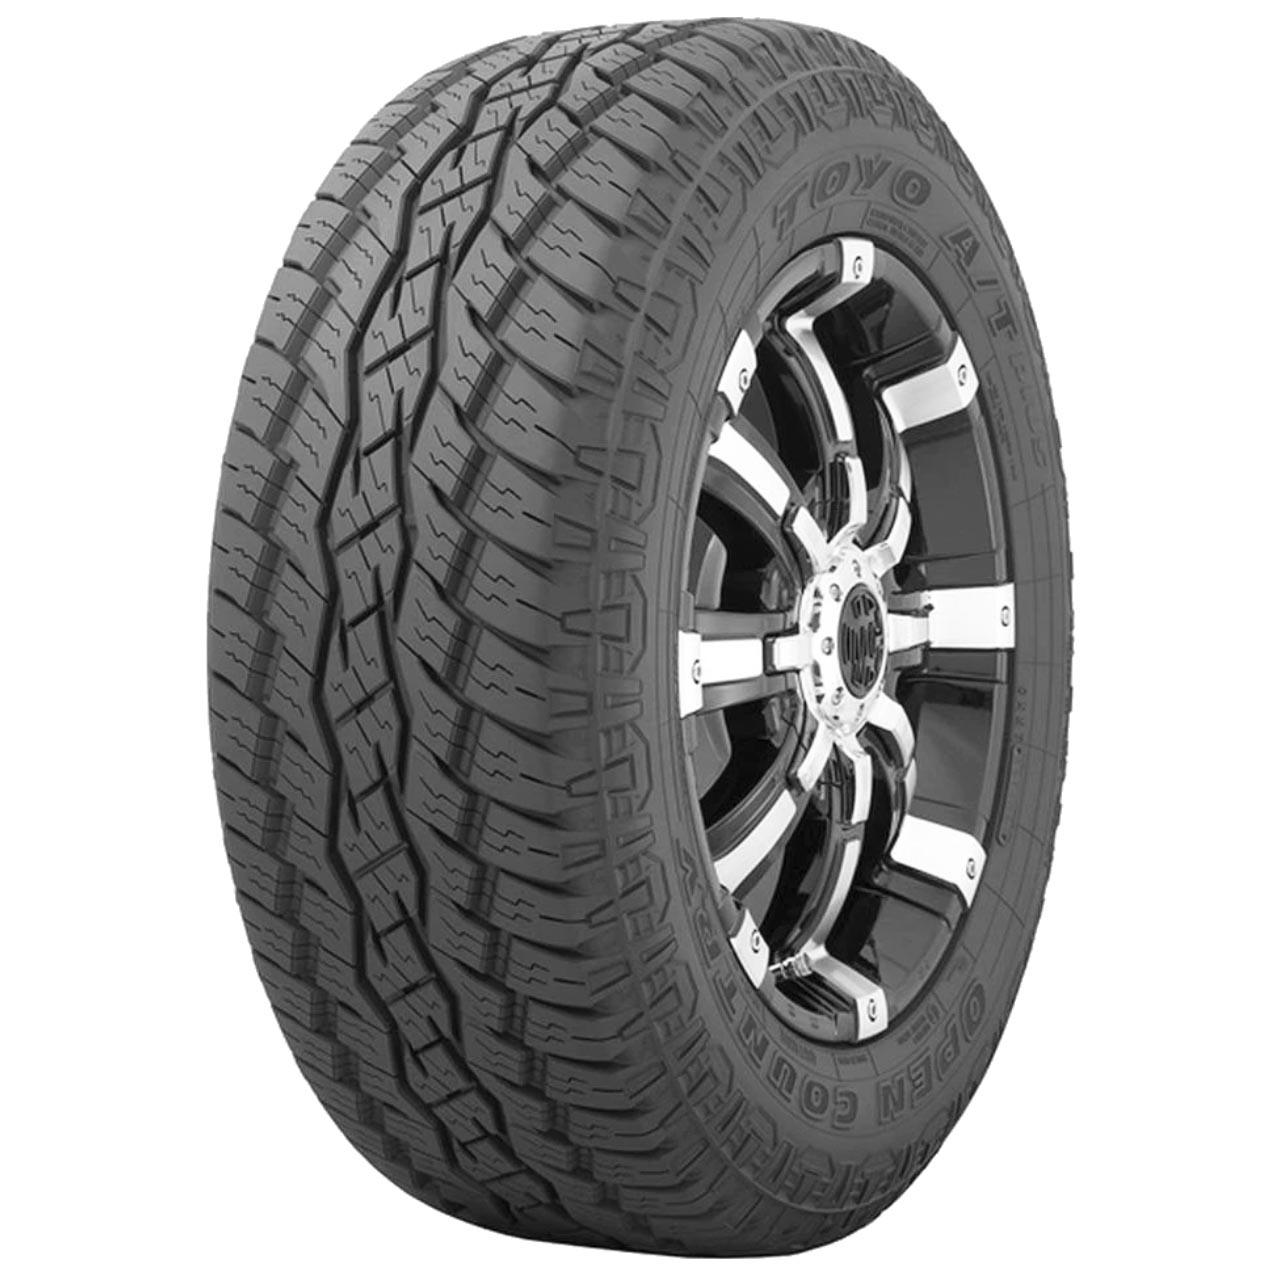 Toyo Open Country AT Plus 215/70R16 100H